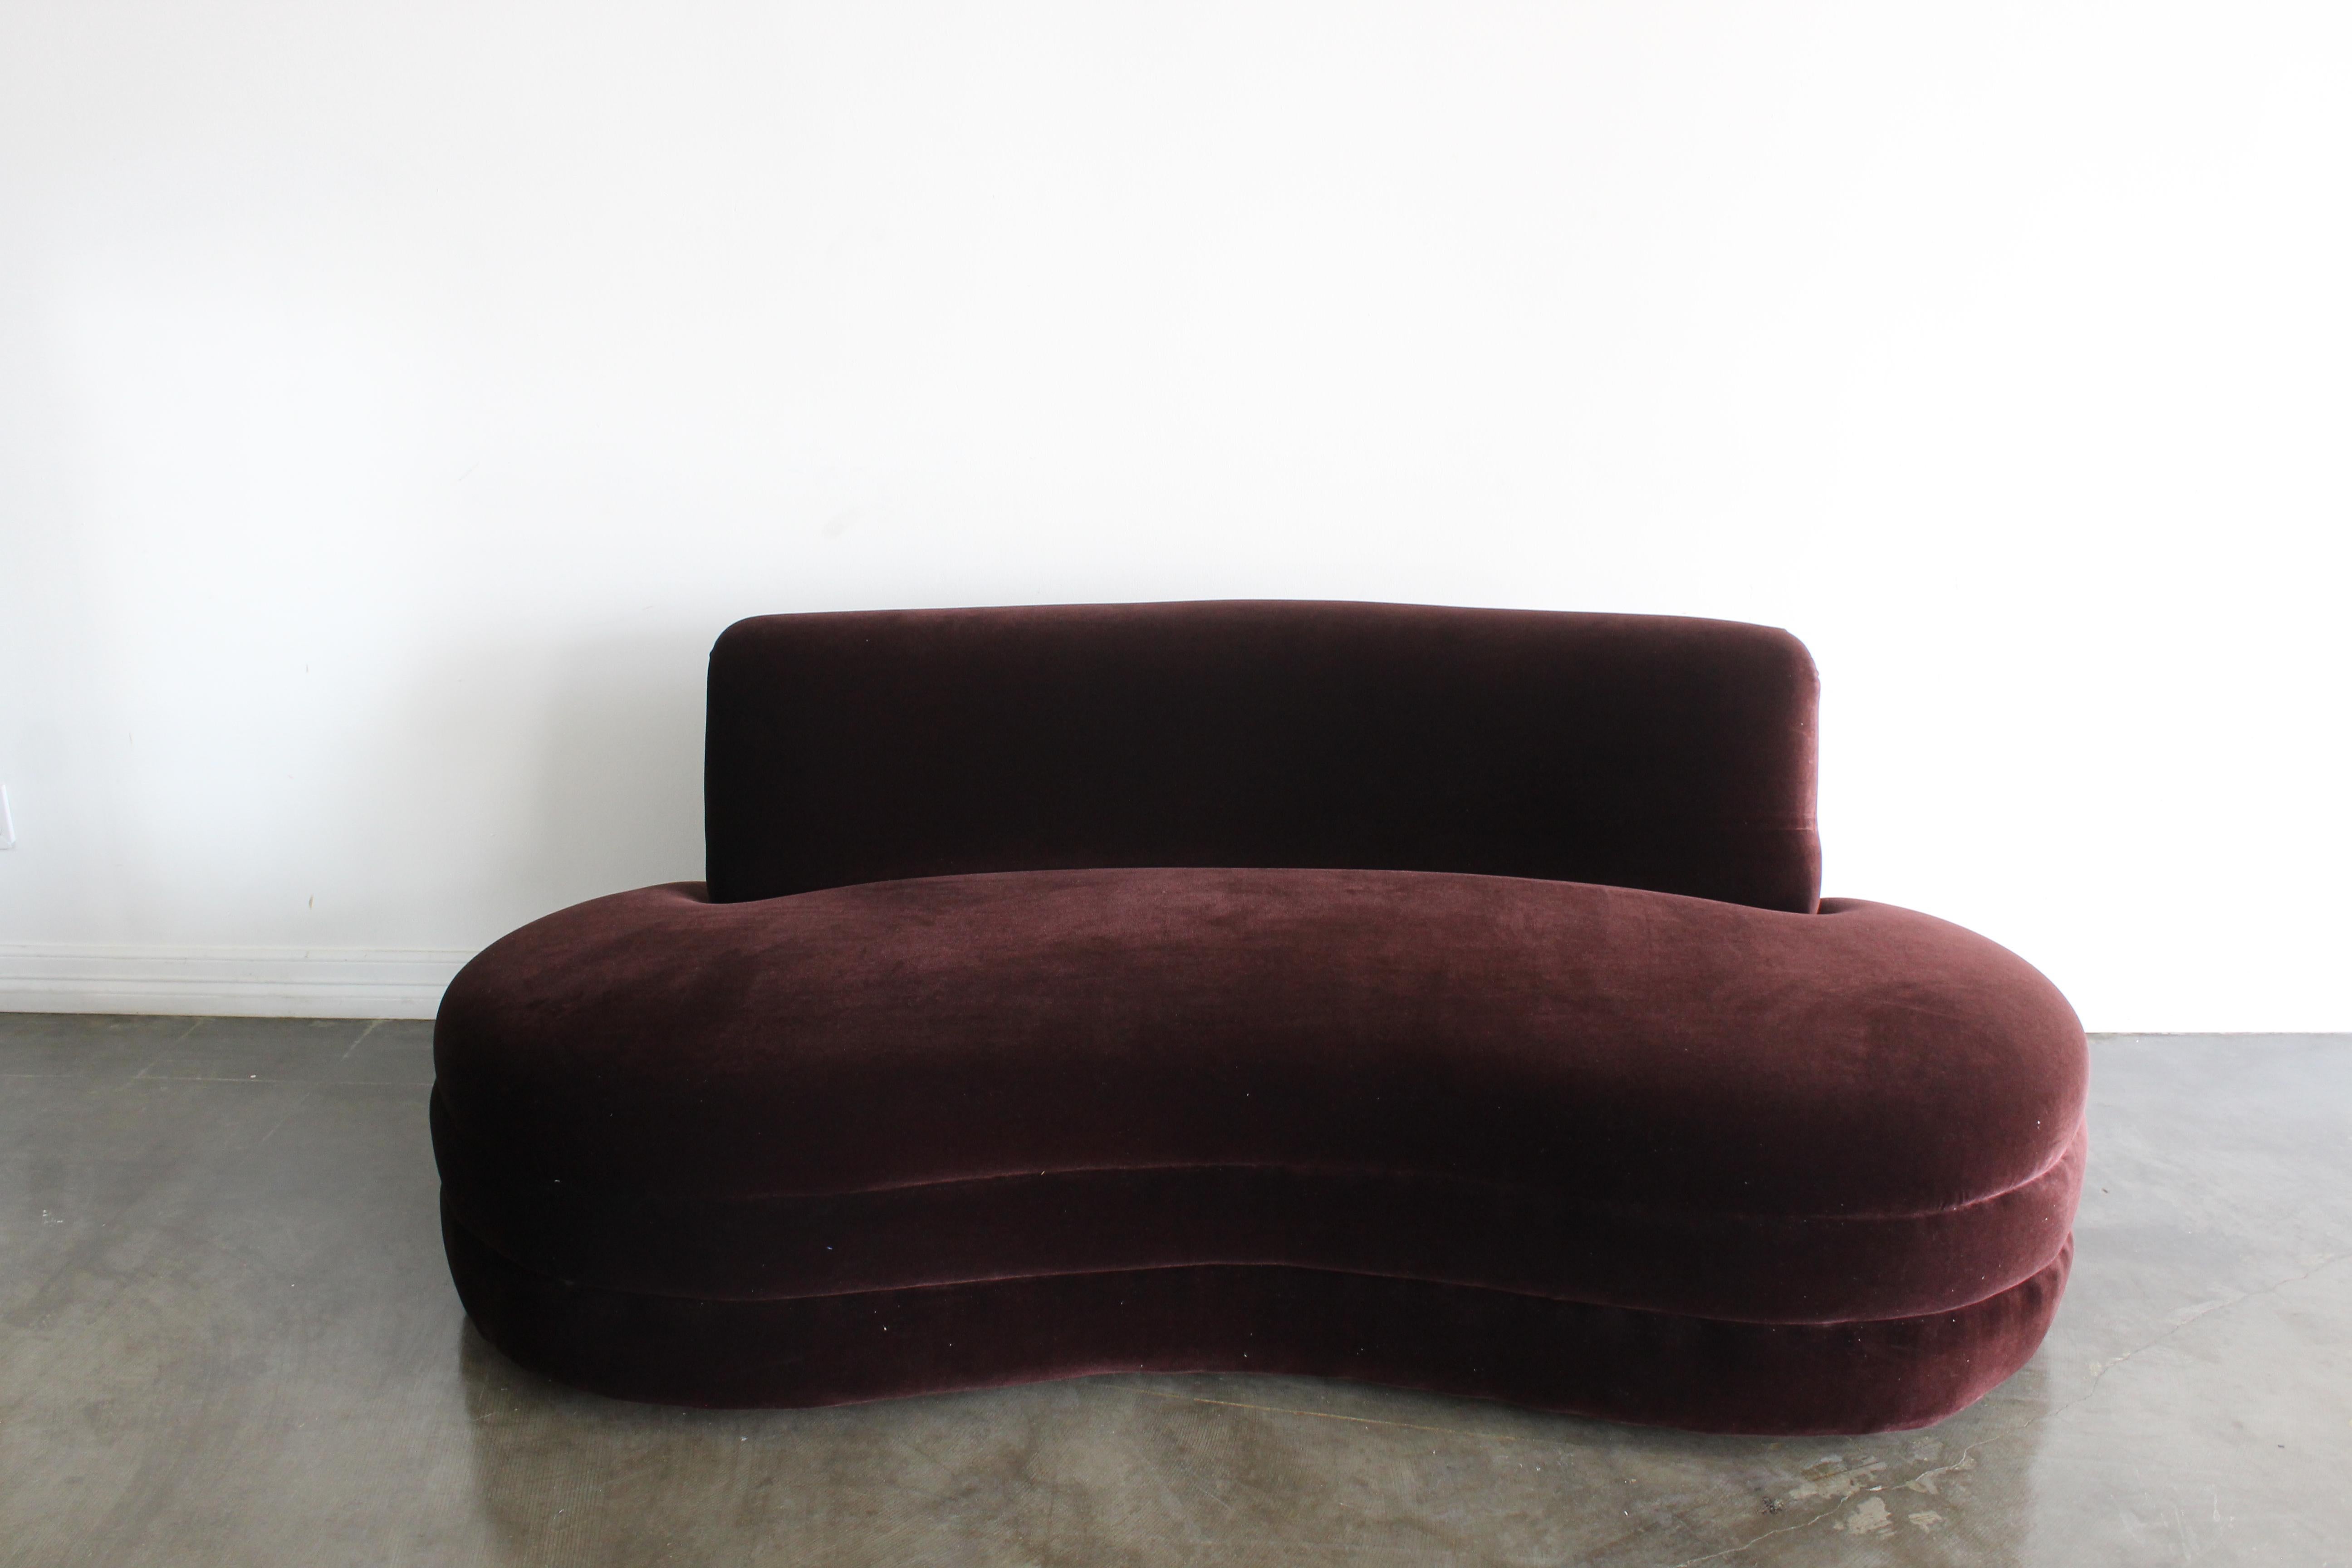 Amazing curved kidney lounge sofa in a deep brown velvet fabric produced by Weiman Furniture Company in the late 80s early 90s. This piece is prefect for any Living room, game room, home bar or bedroom seating area. Wear is consistent with age